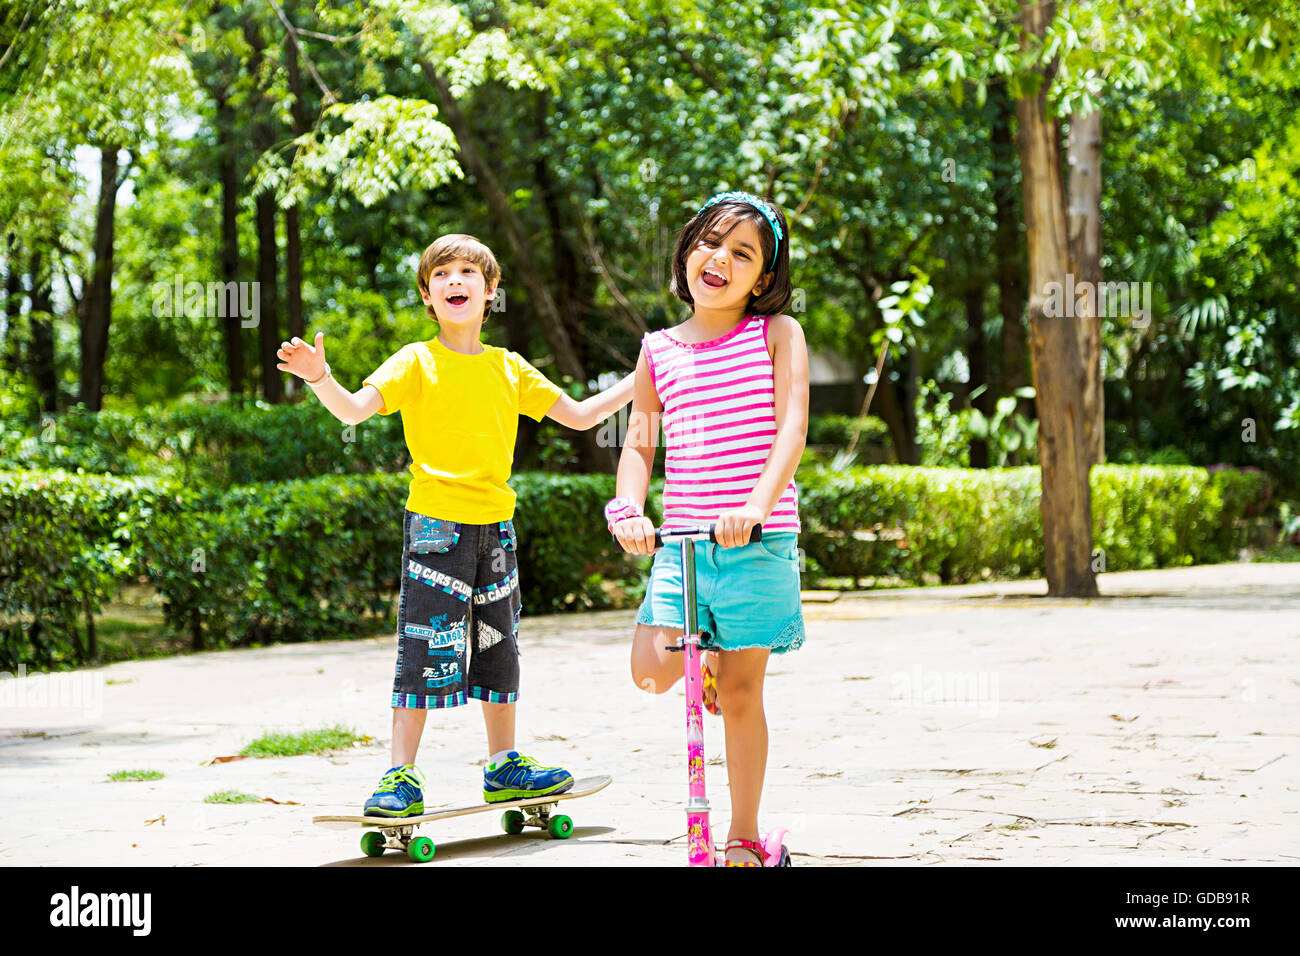 2 indians Kids boy and girl friends  Push Scooter Riding and Skateboard Skating Stock Photo